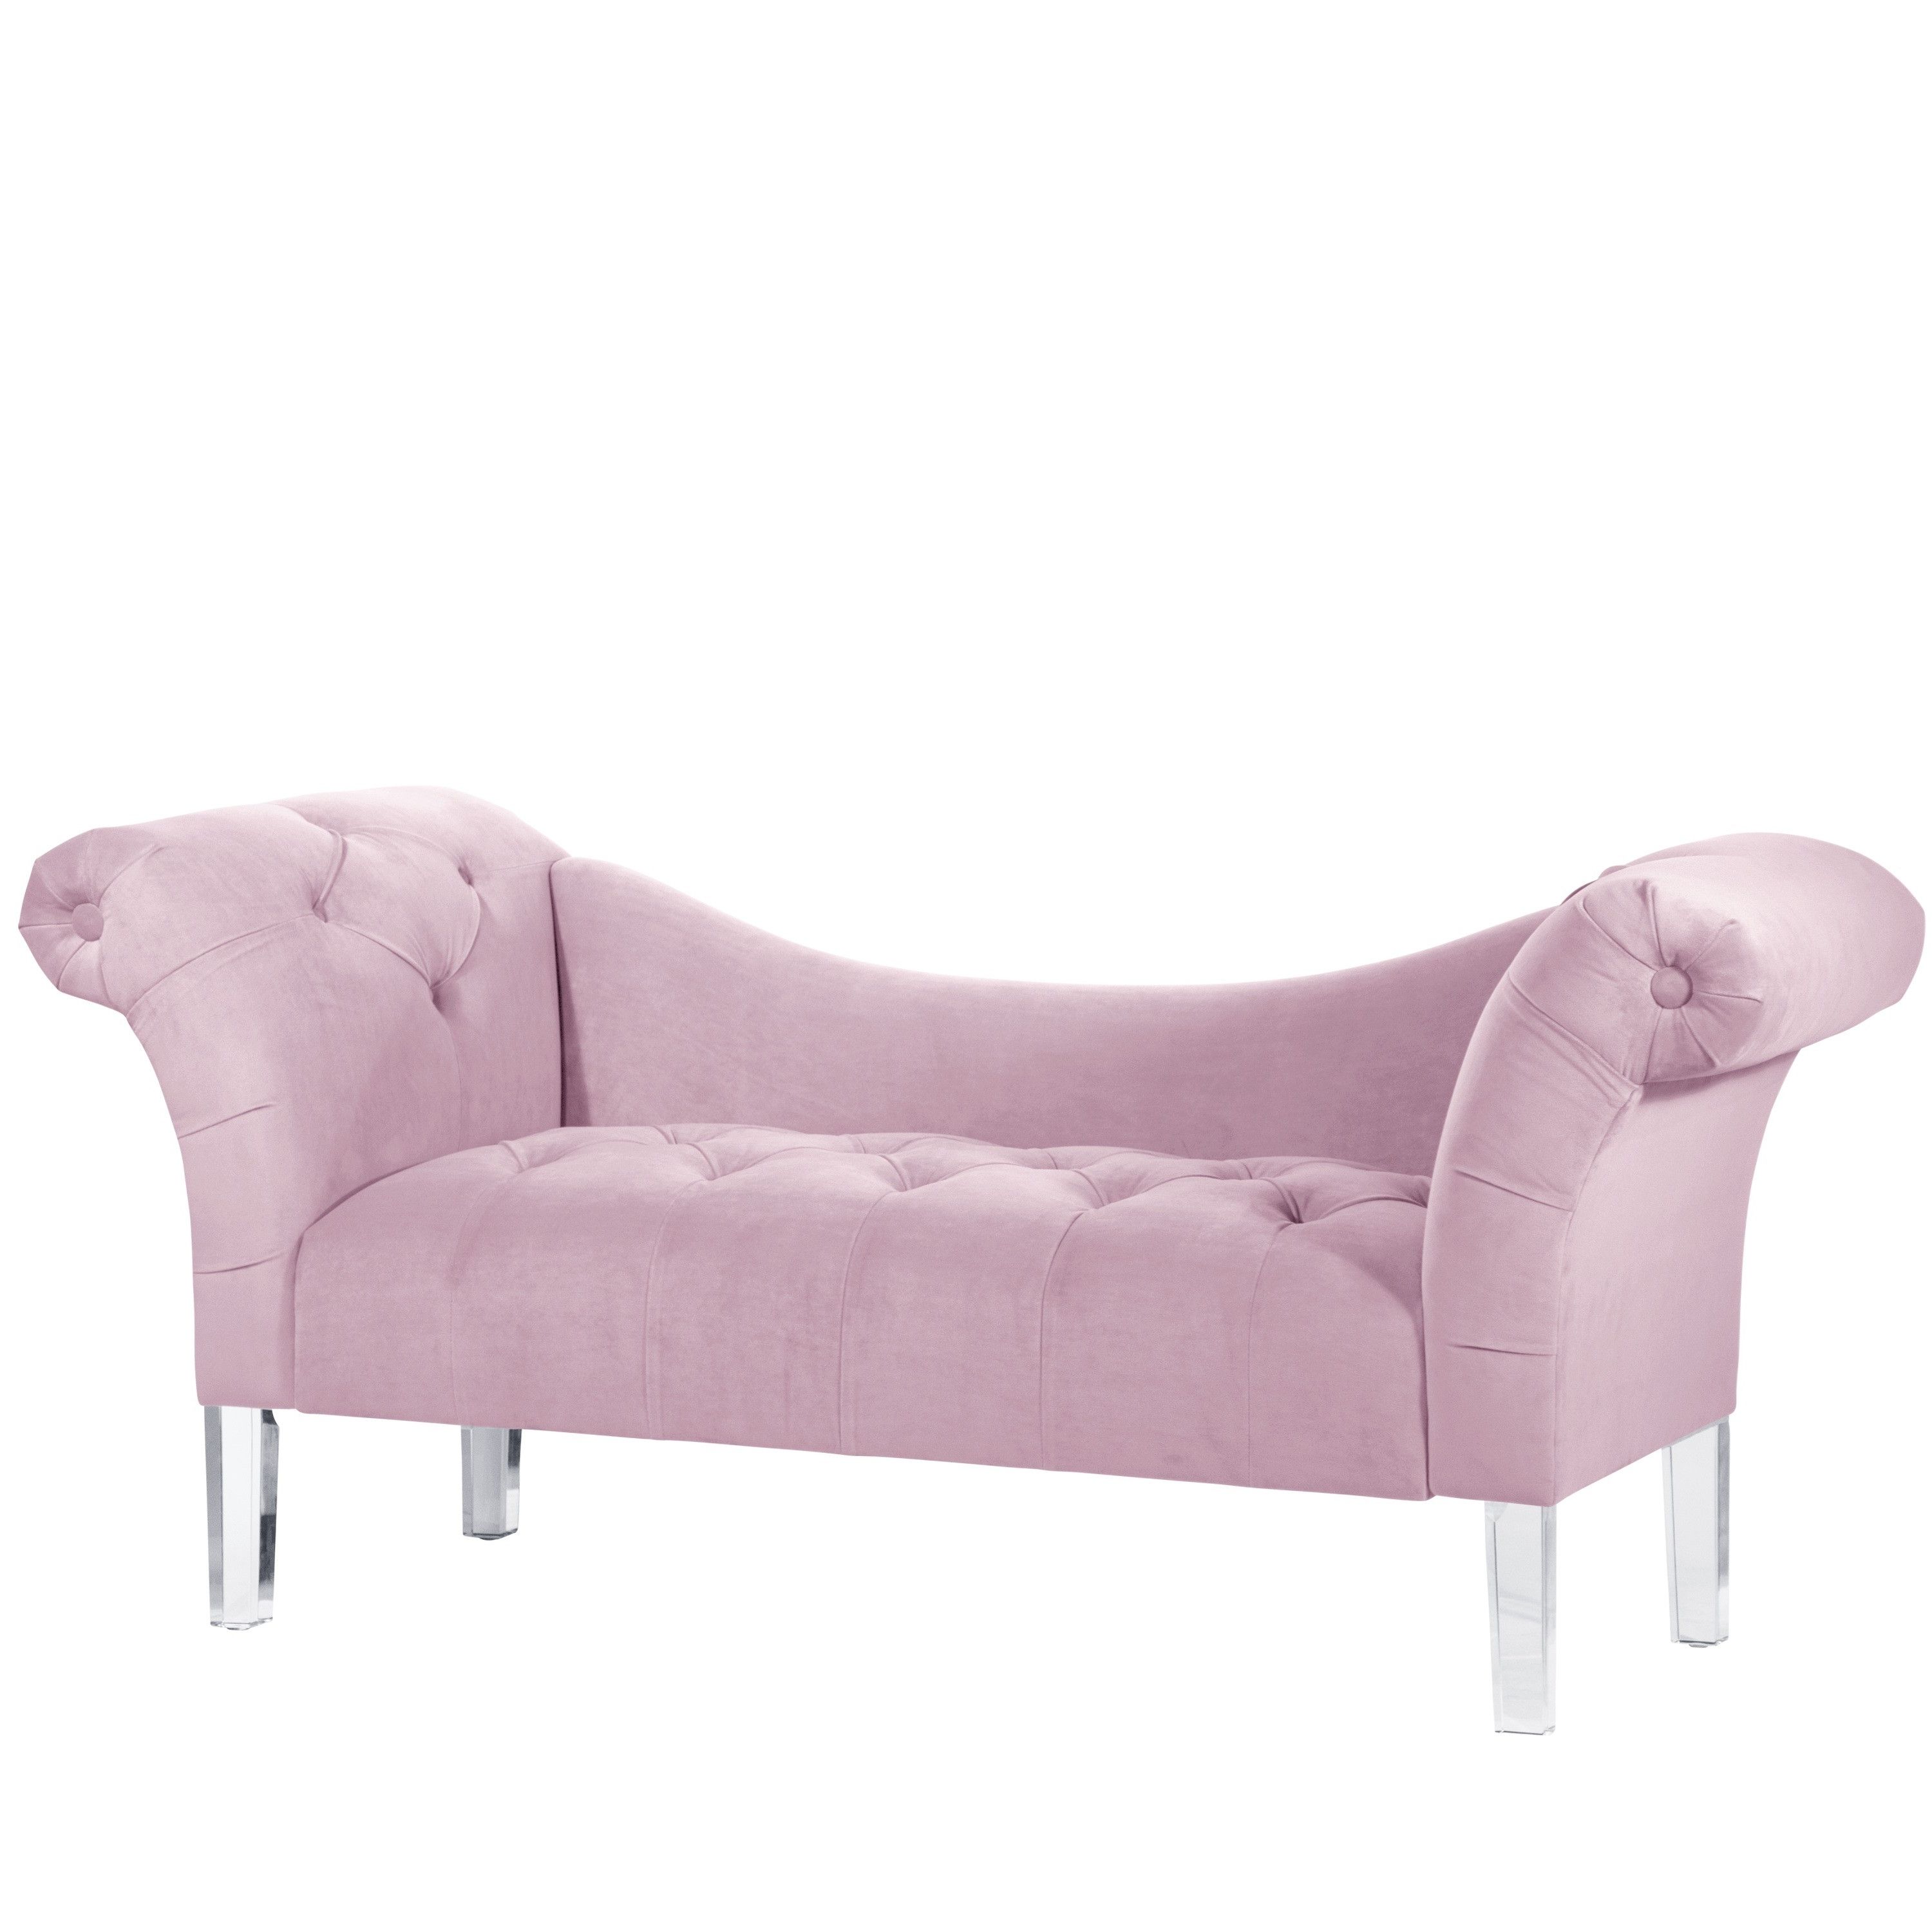 Most Recently Released Pink Chaise Lounges Intended For Betsy Velvet Chaise Lounge, Lilac (View 8 of 15)